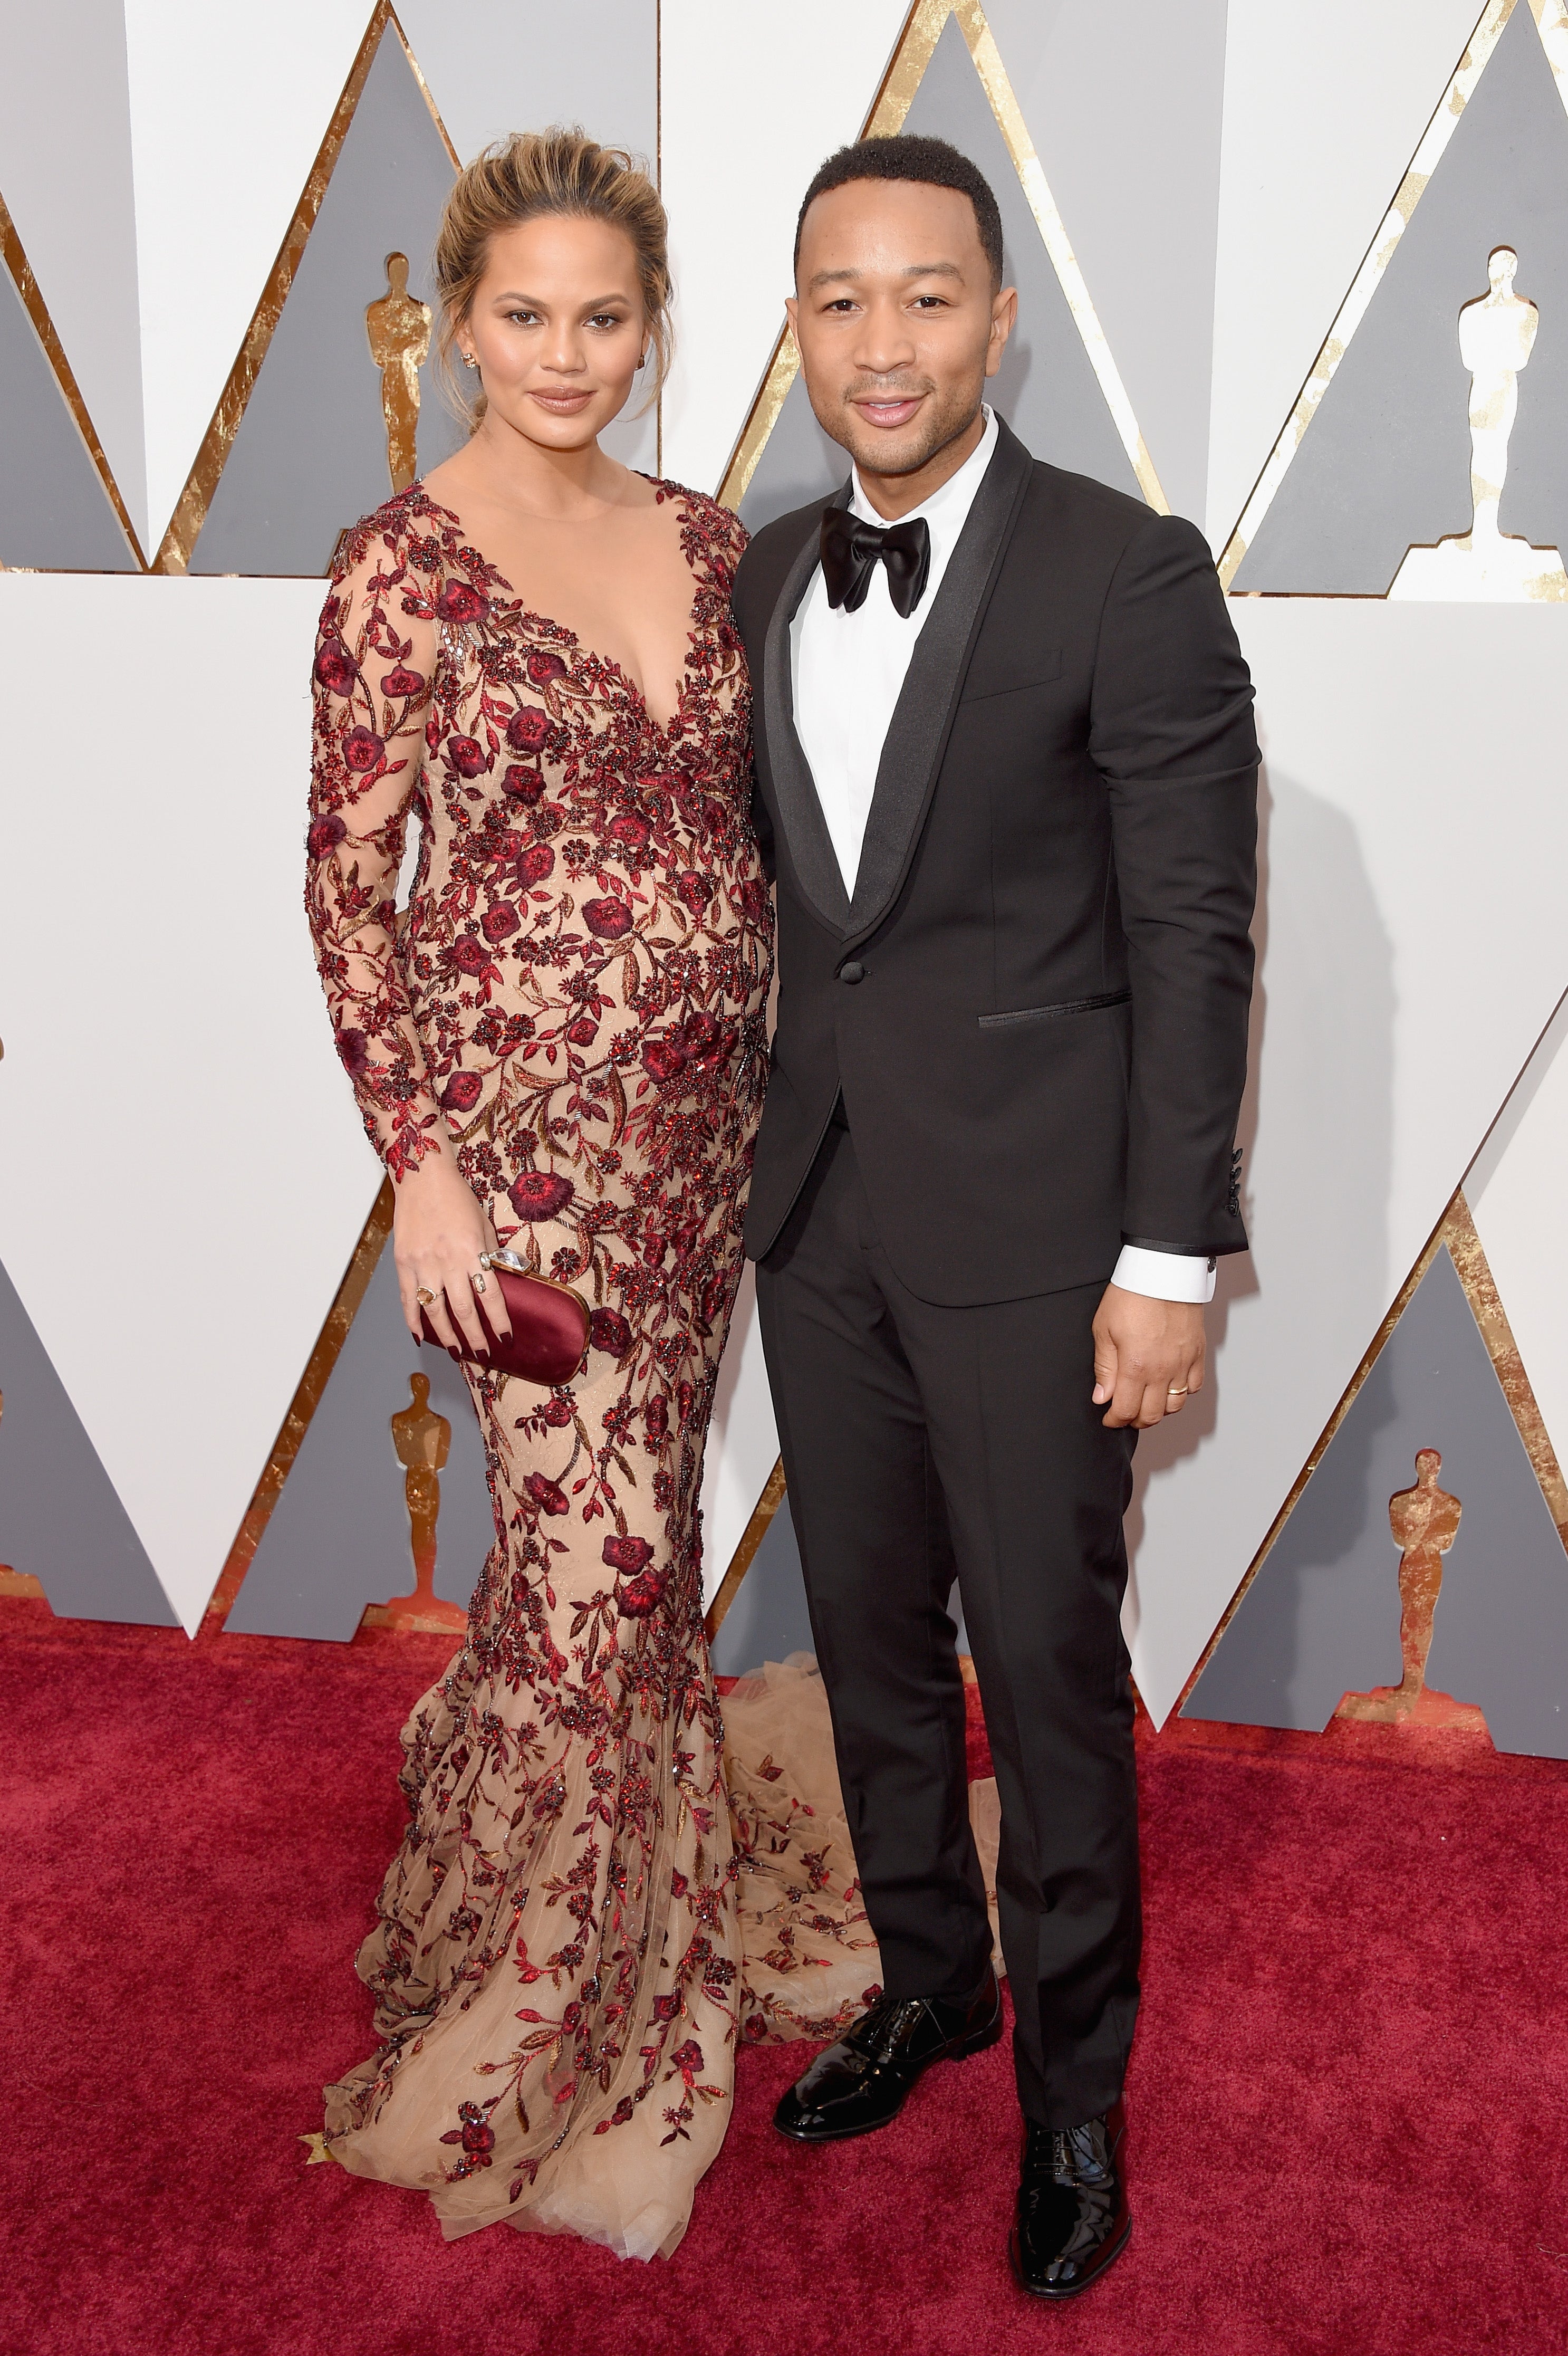 Red Carpet Recap: Oscars Arrivals, Fashion, and More!